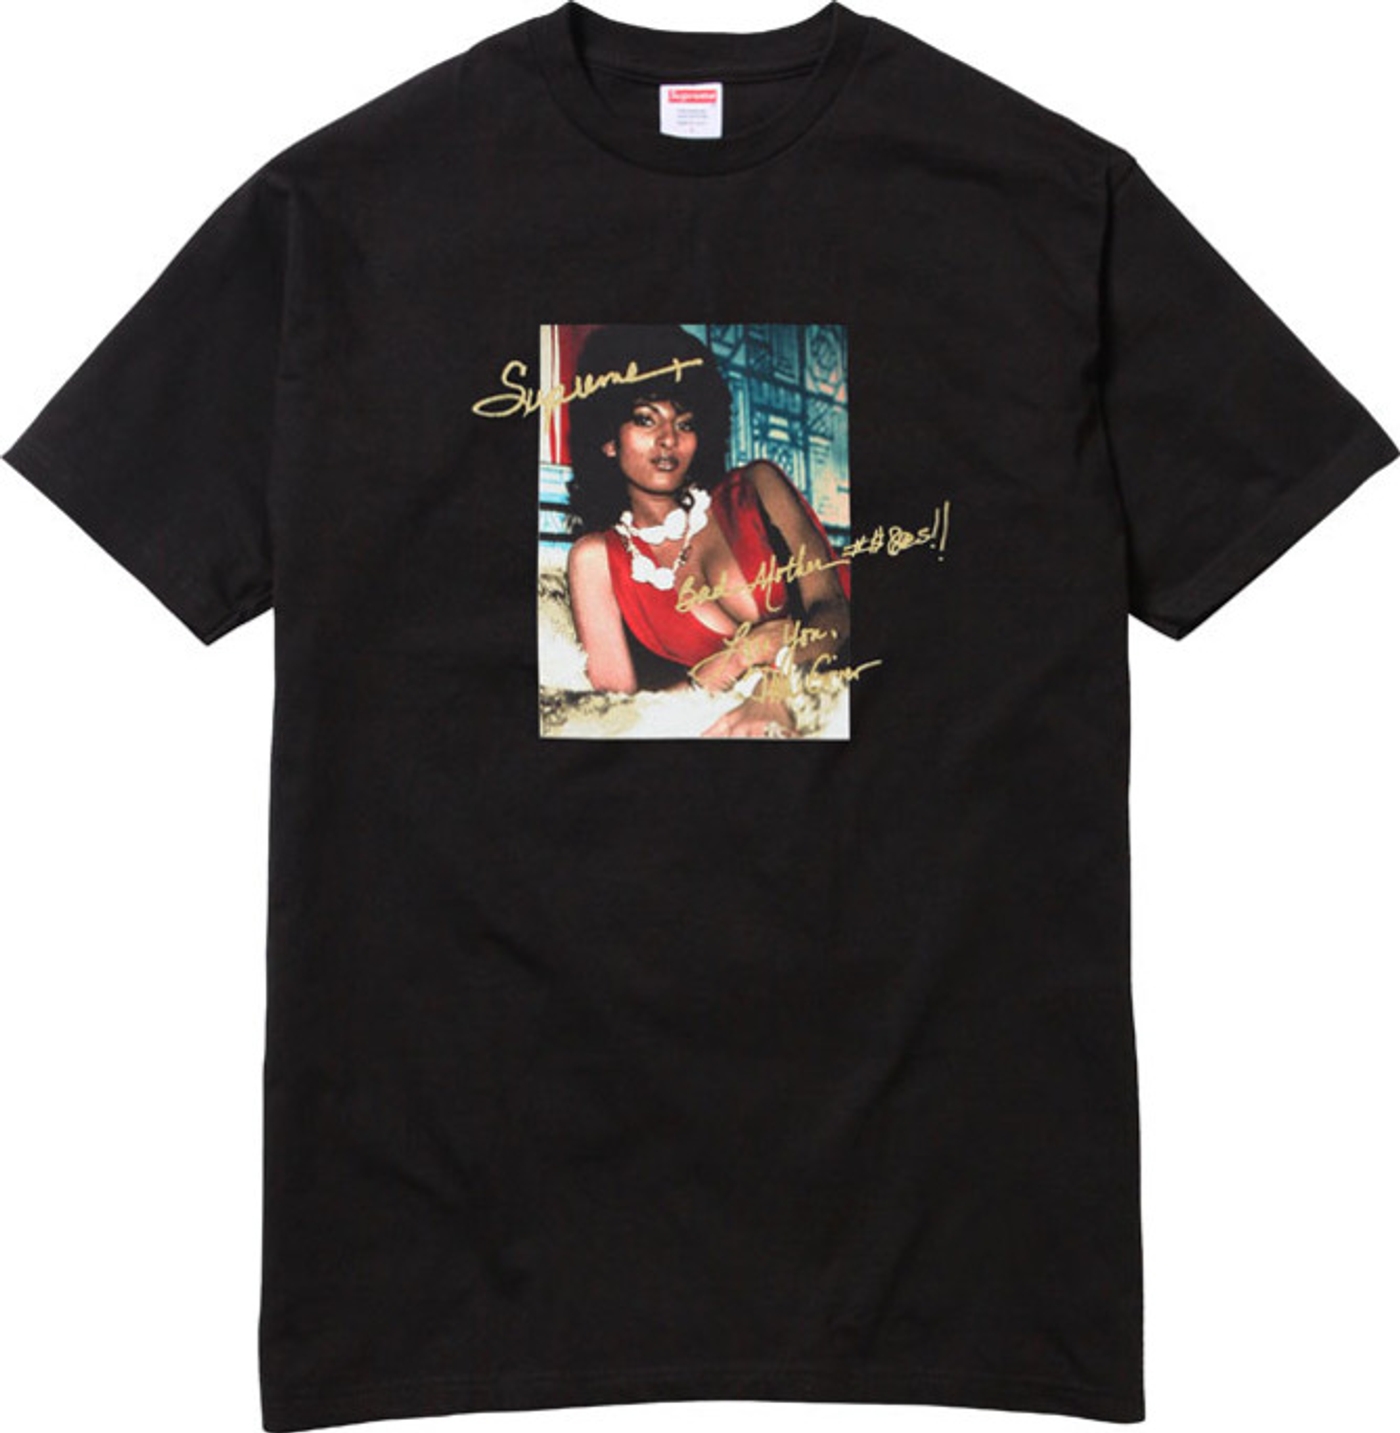 Pam Grier for Supreme 
All cotton classic Supreme t-shirt (7/9)